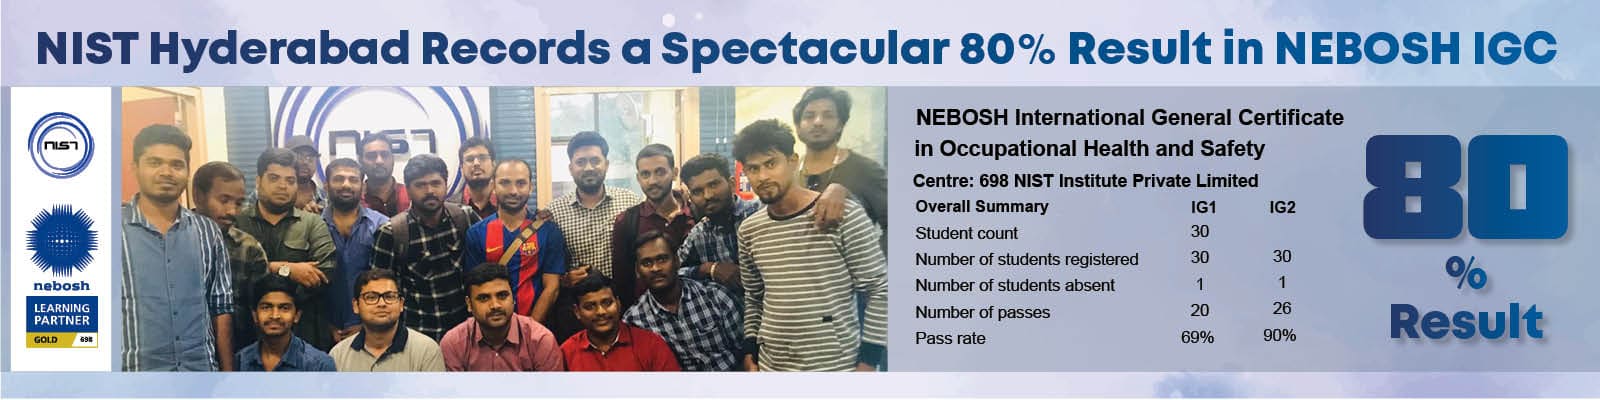 nist-hyderabad-records-a-remarkable-result-of-80-achieved-in-nebosh-igc